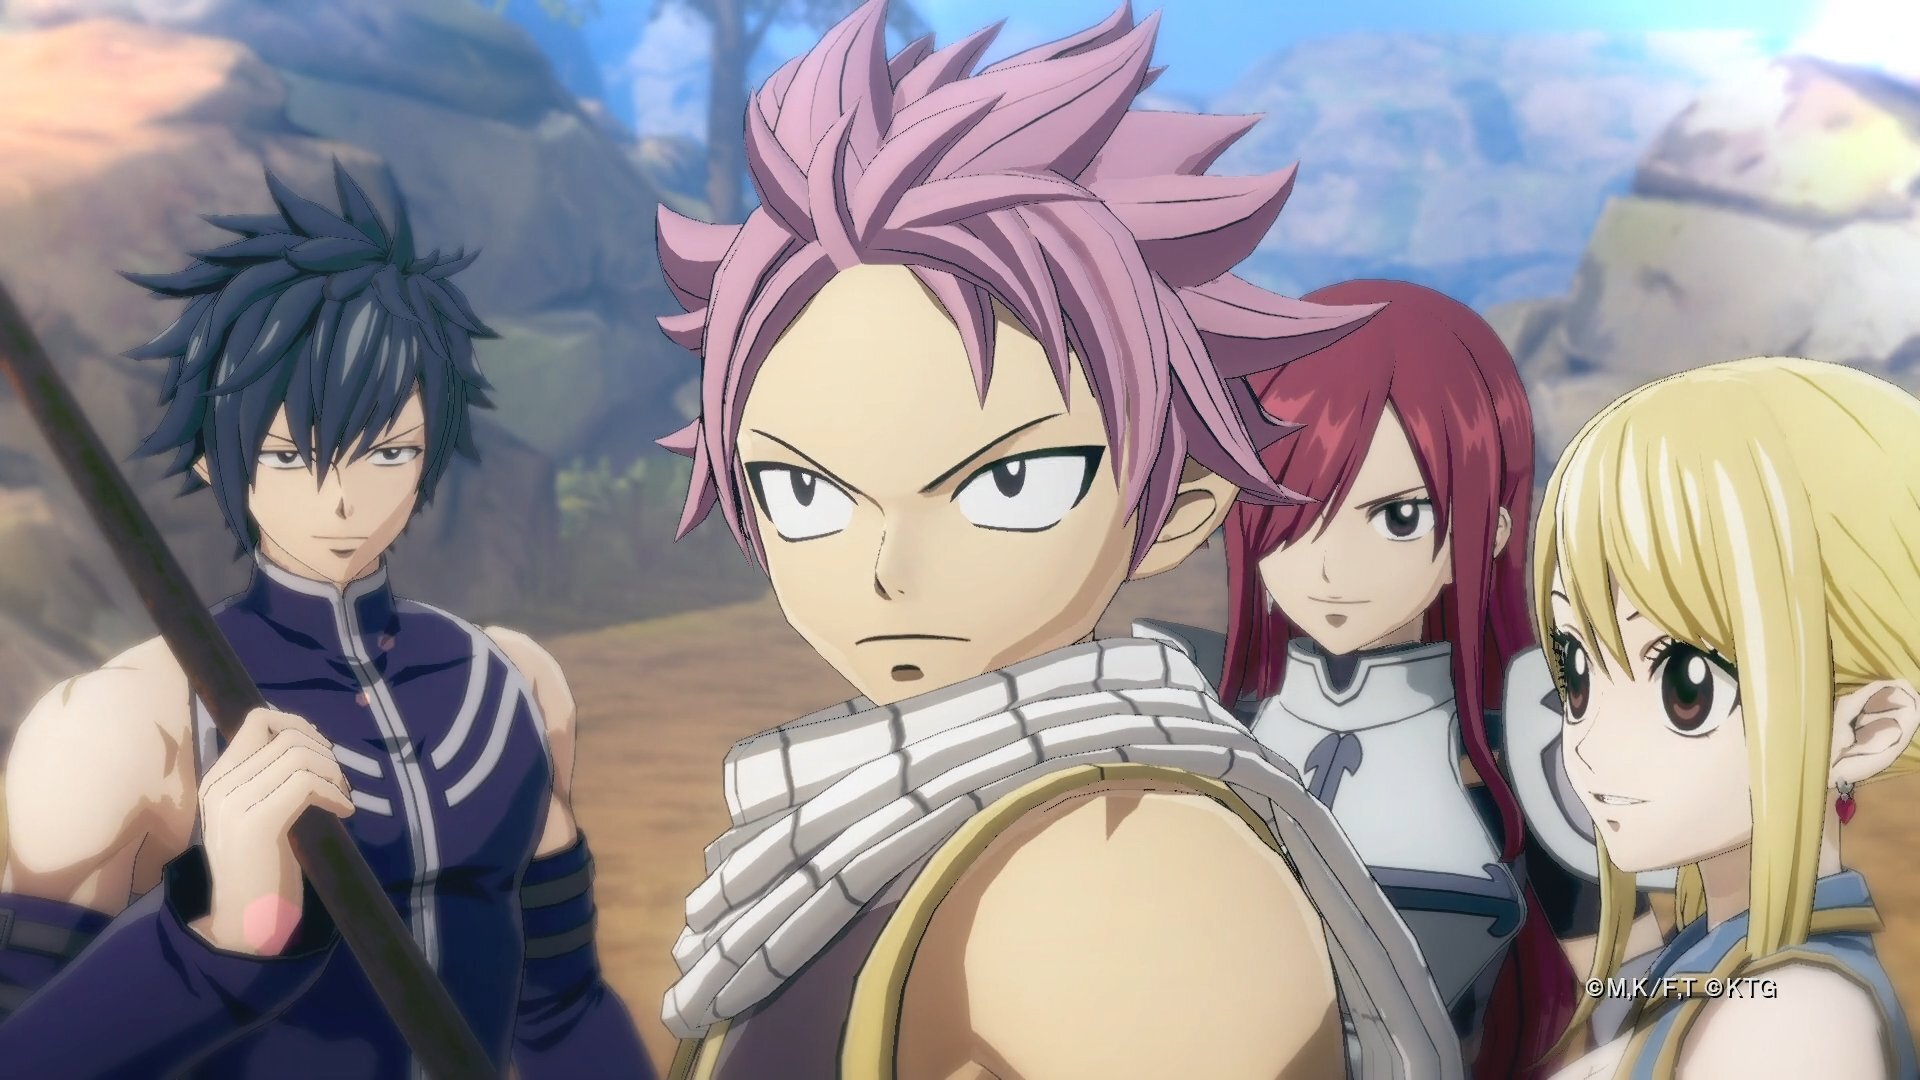 Which Fairy Tail game characters should join you in mission?